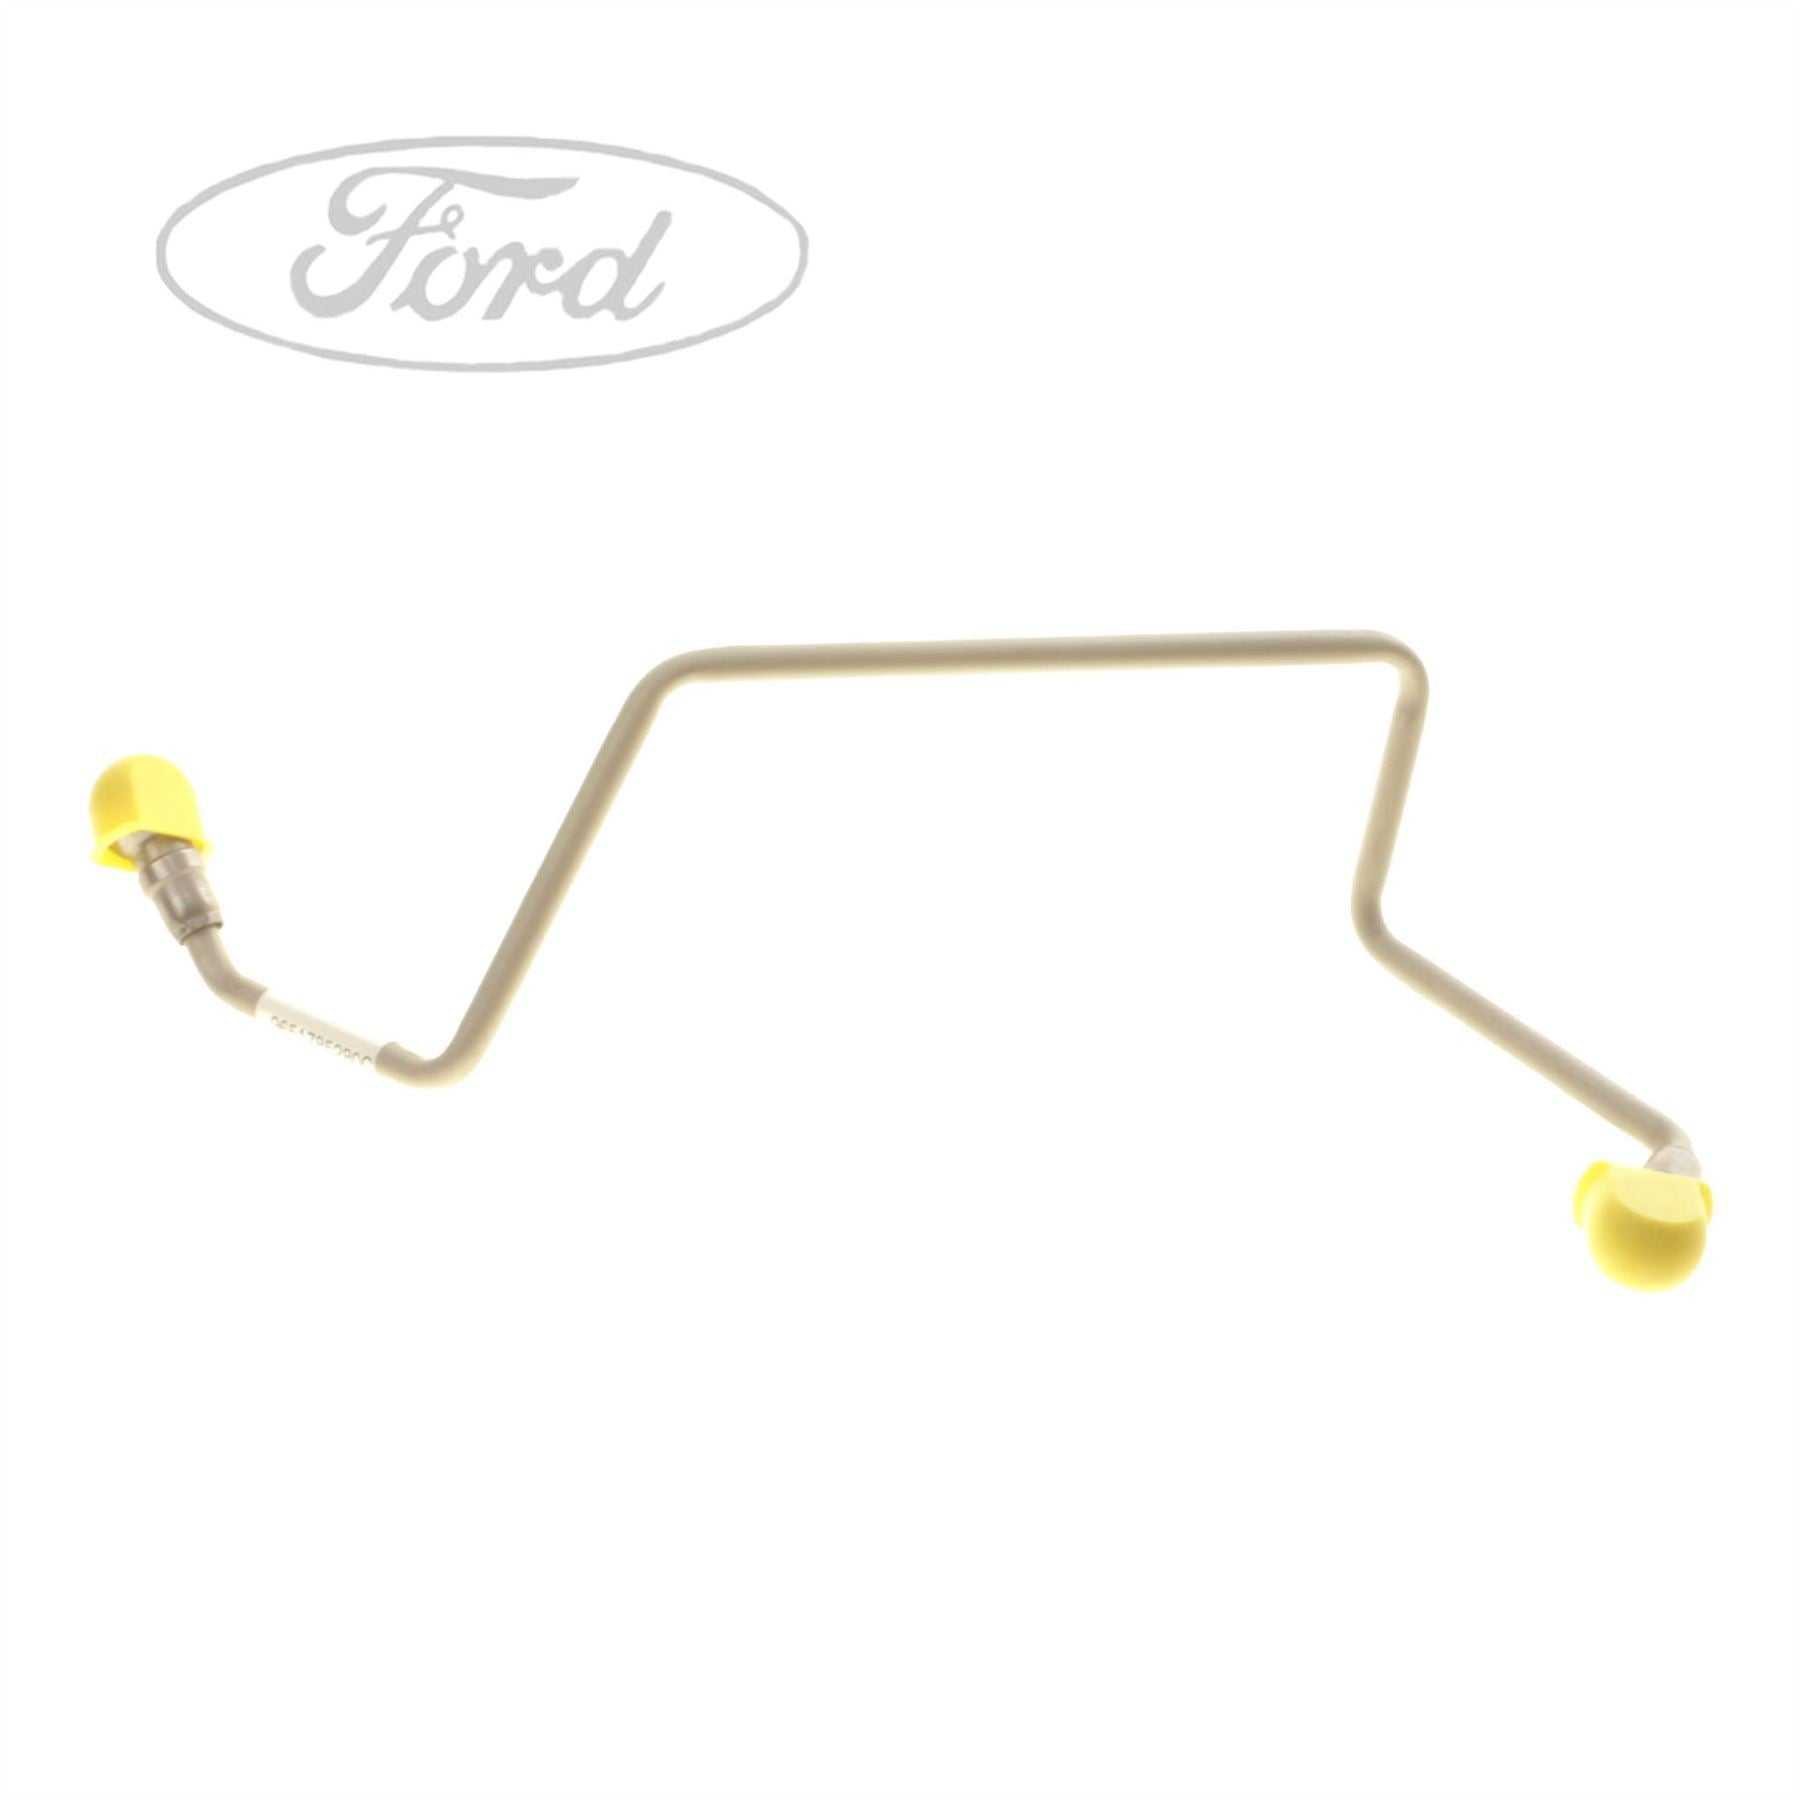 Ford, TURBO OIL FEED PIPE